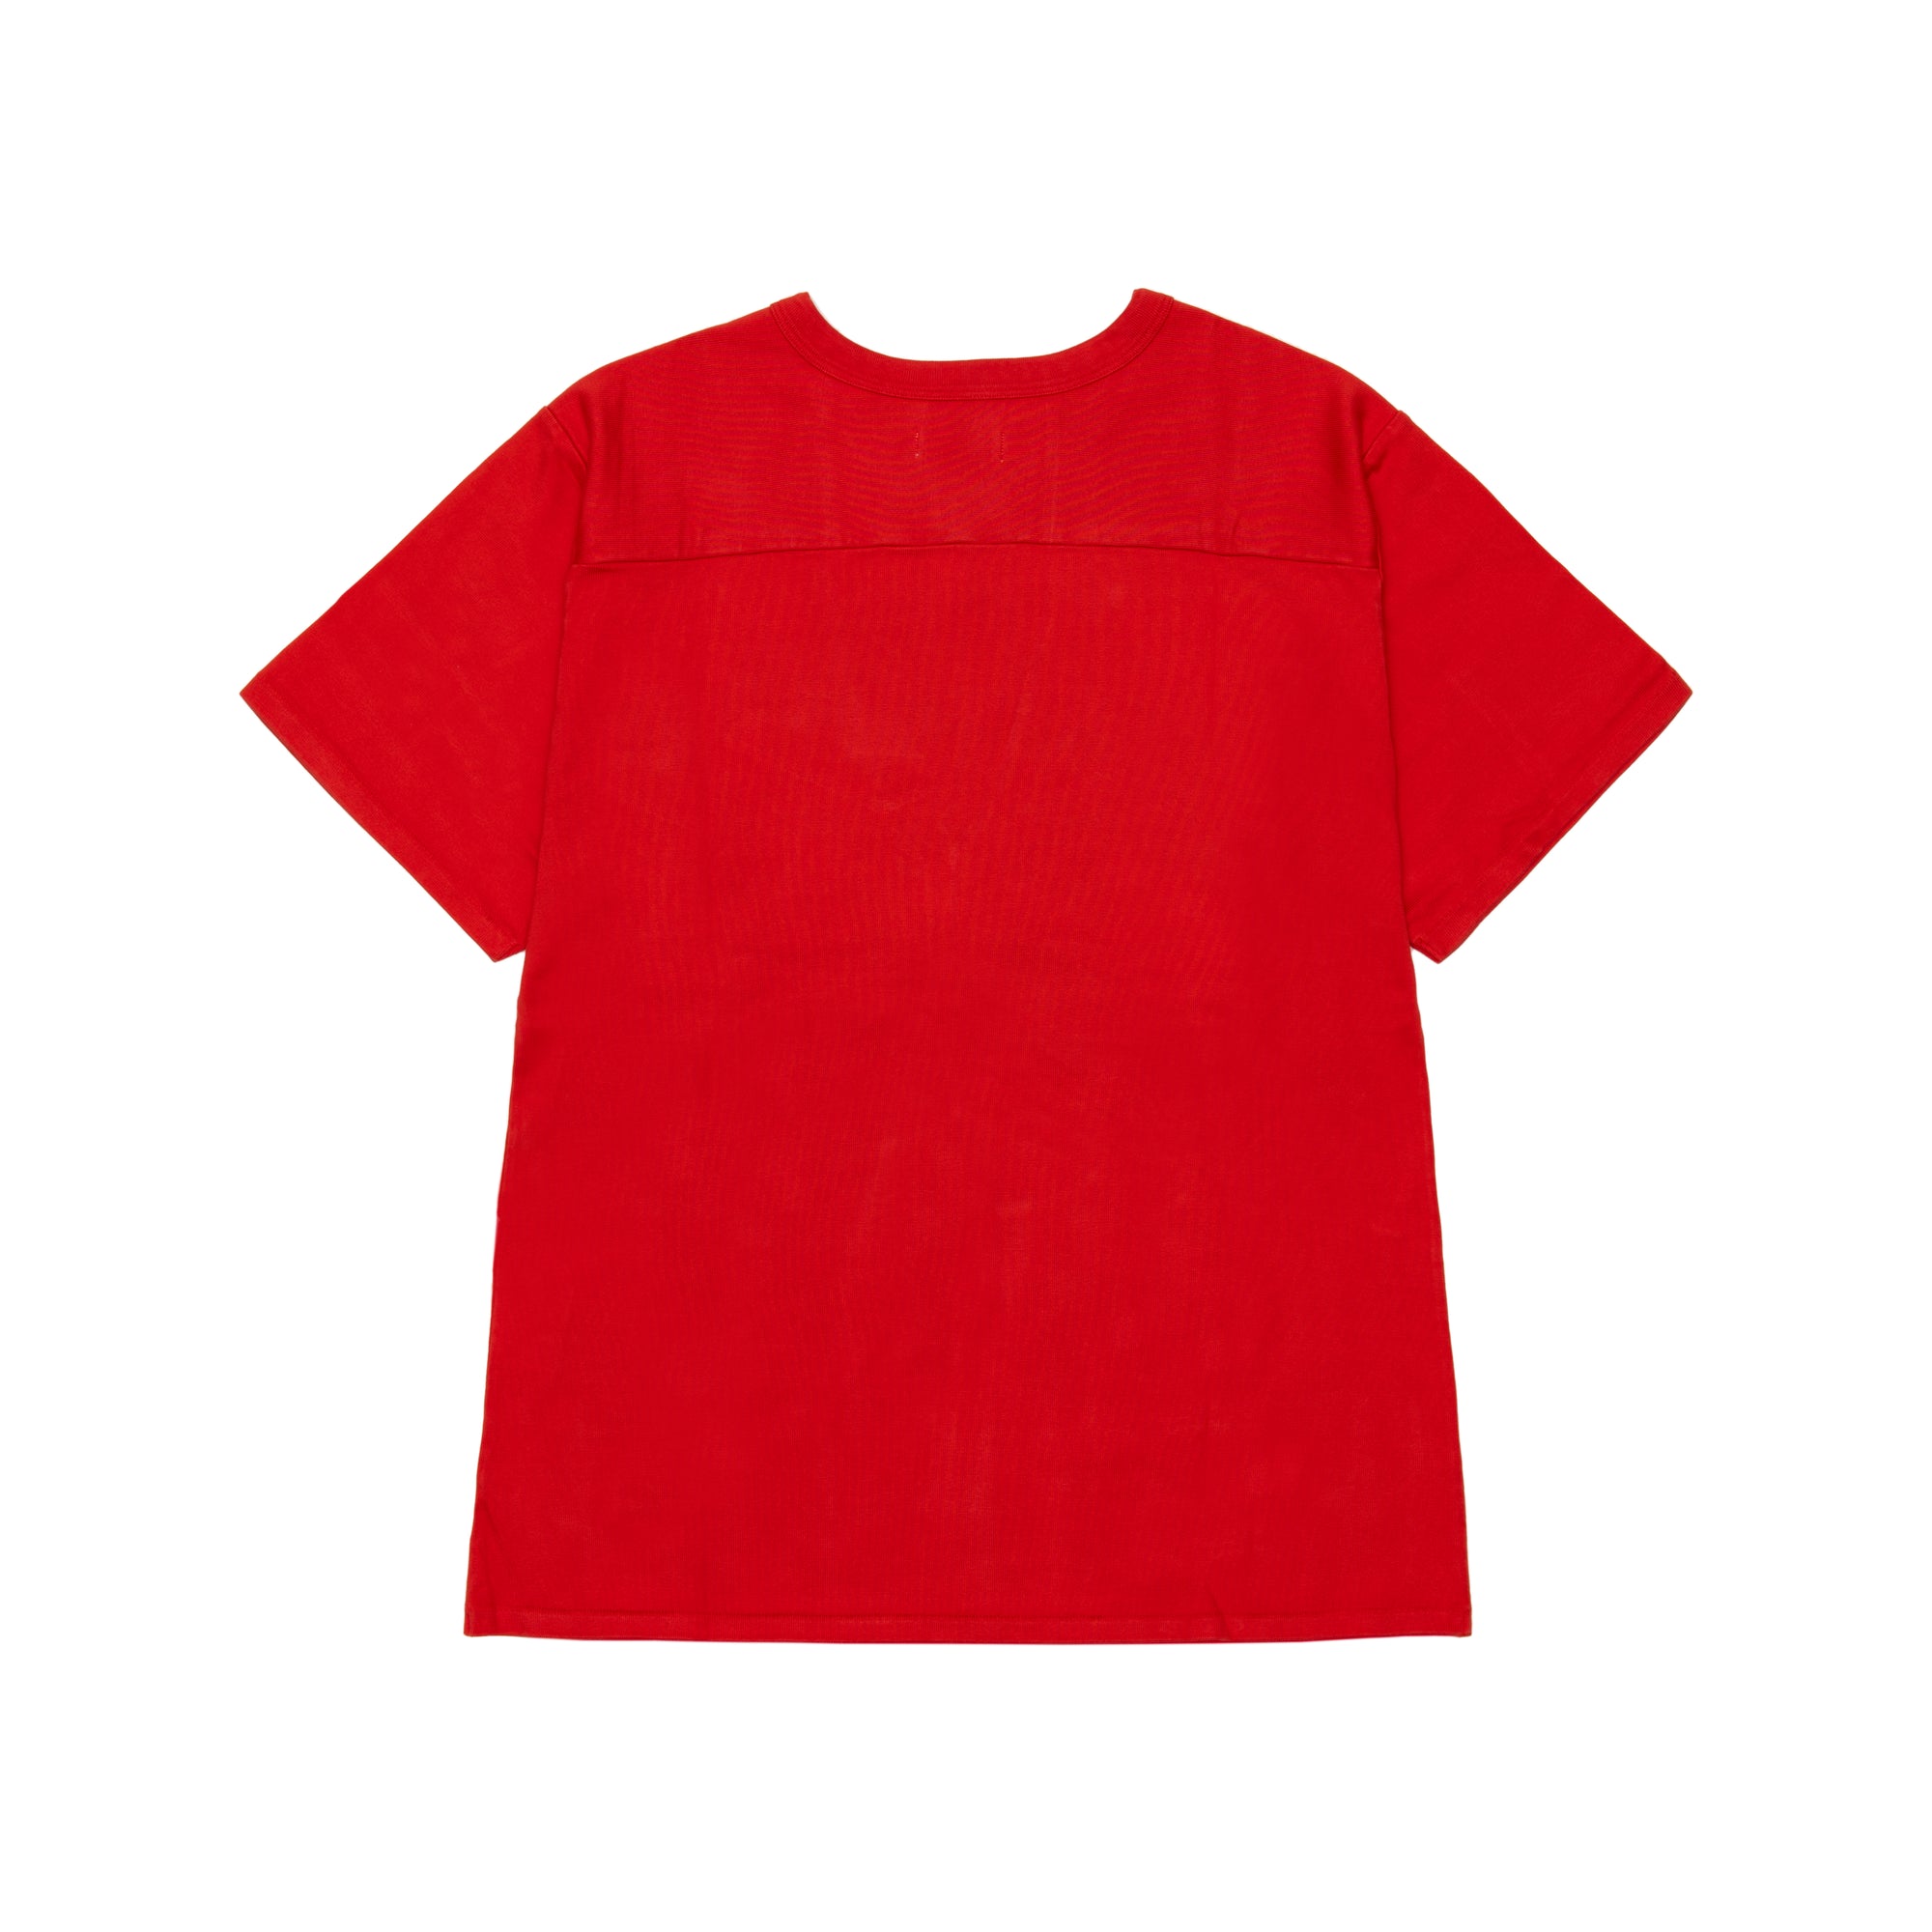 ERL - Football Shirt - (Red) view 2